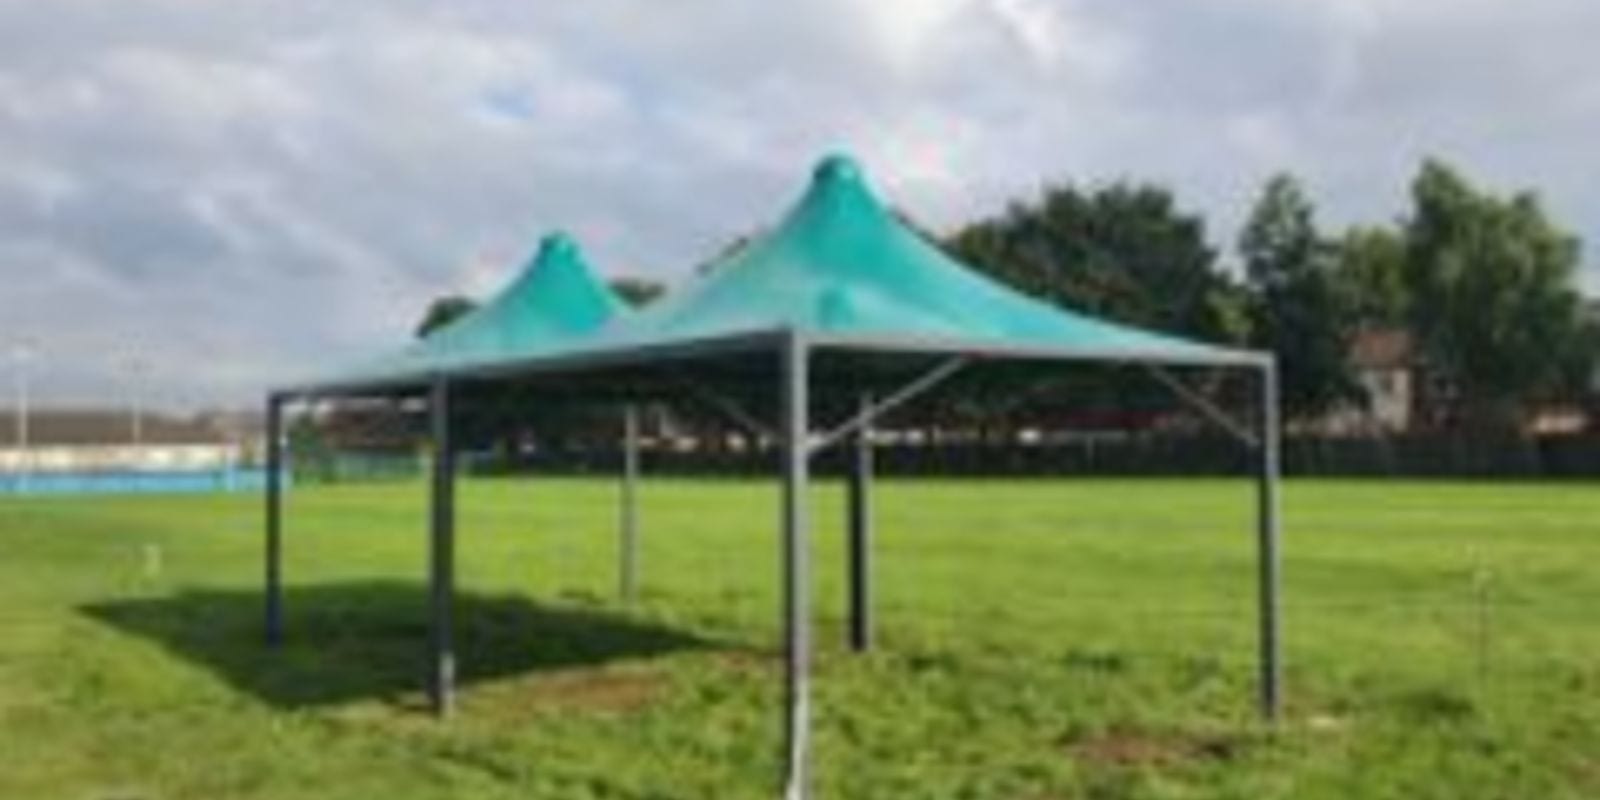 Fabric canopies we installed at Bowesfield Primary School